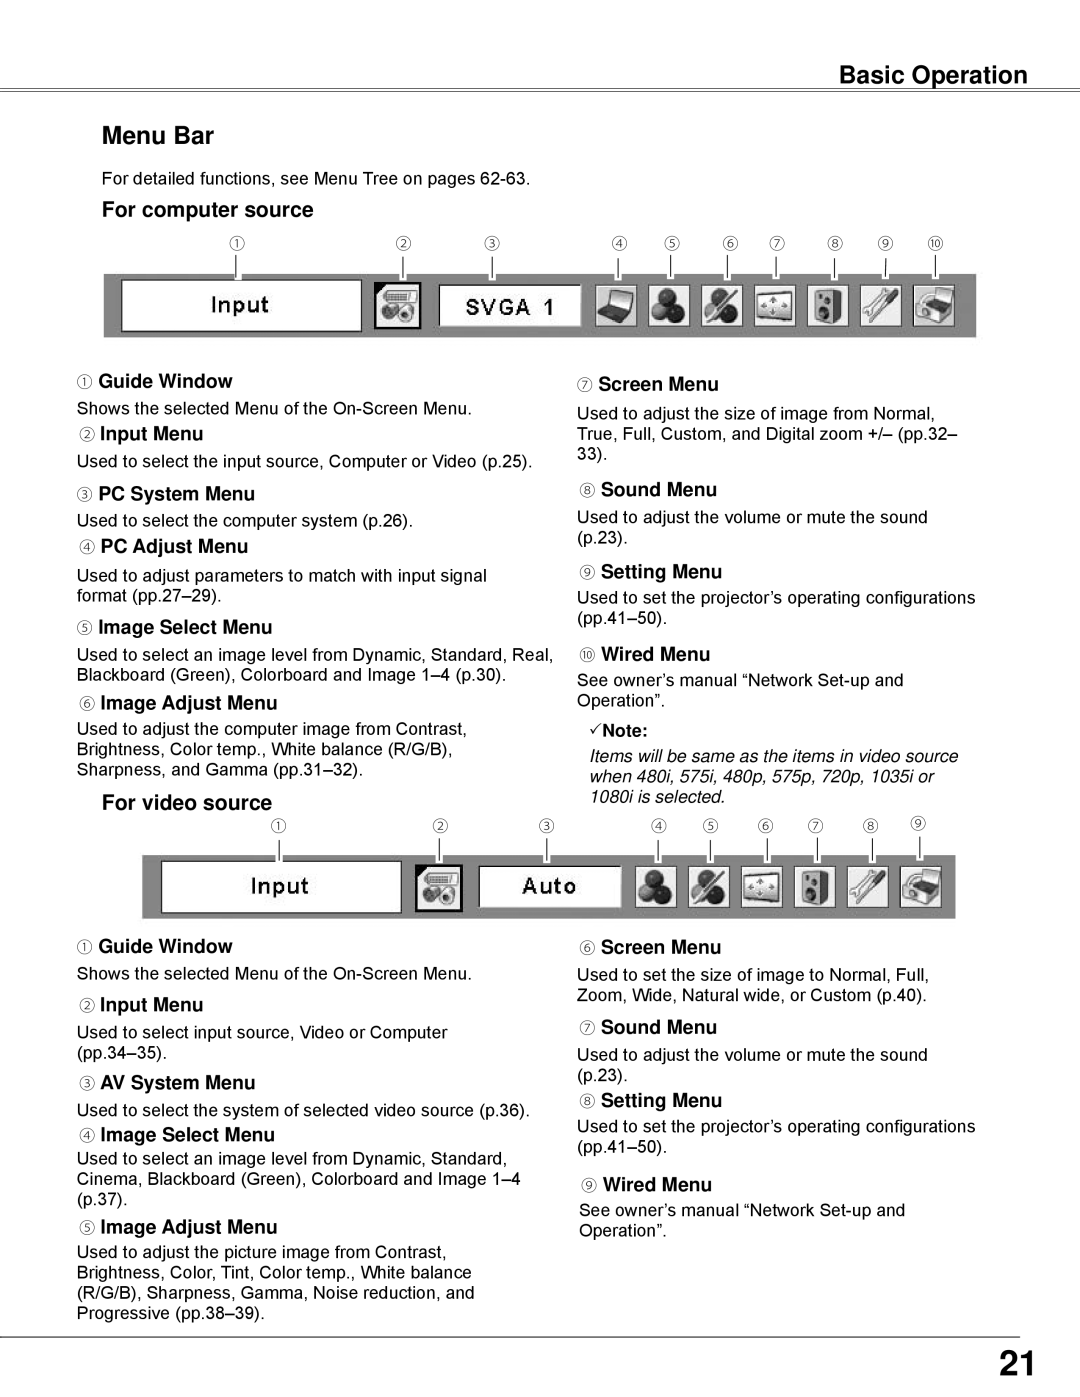 Sanyo PLC-WXE45 owner manual Menu Bar, For computer source, For video source, Basic Operation 